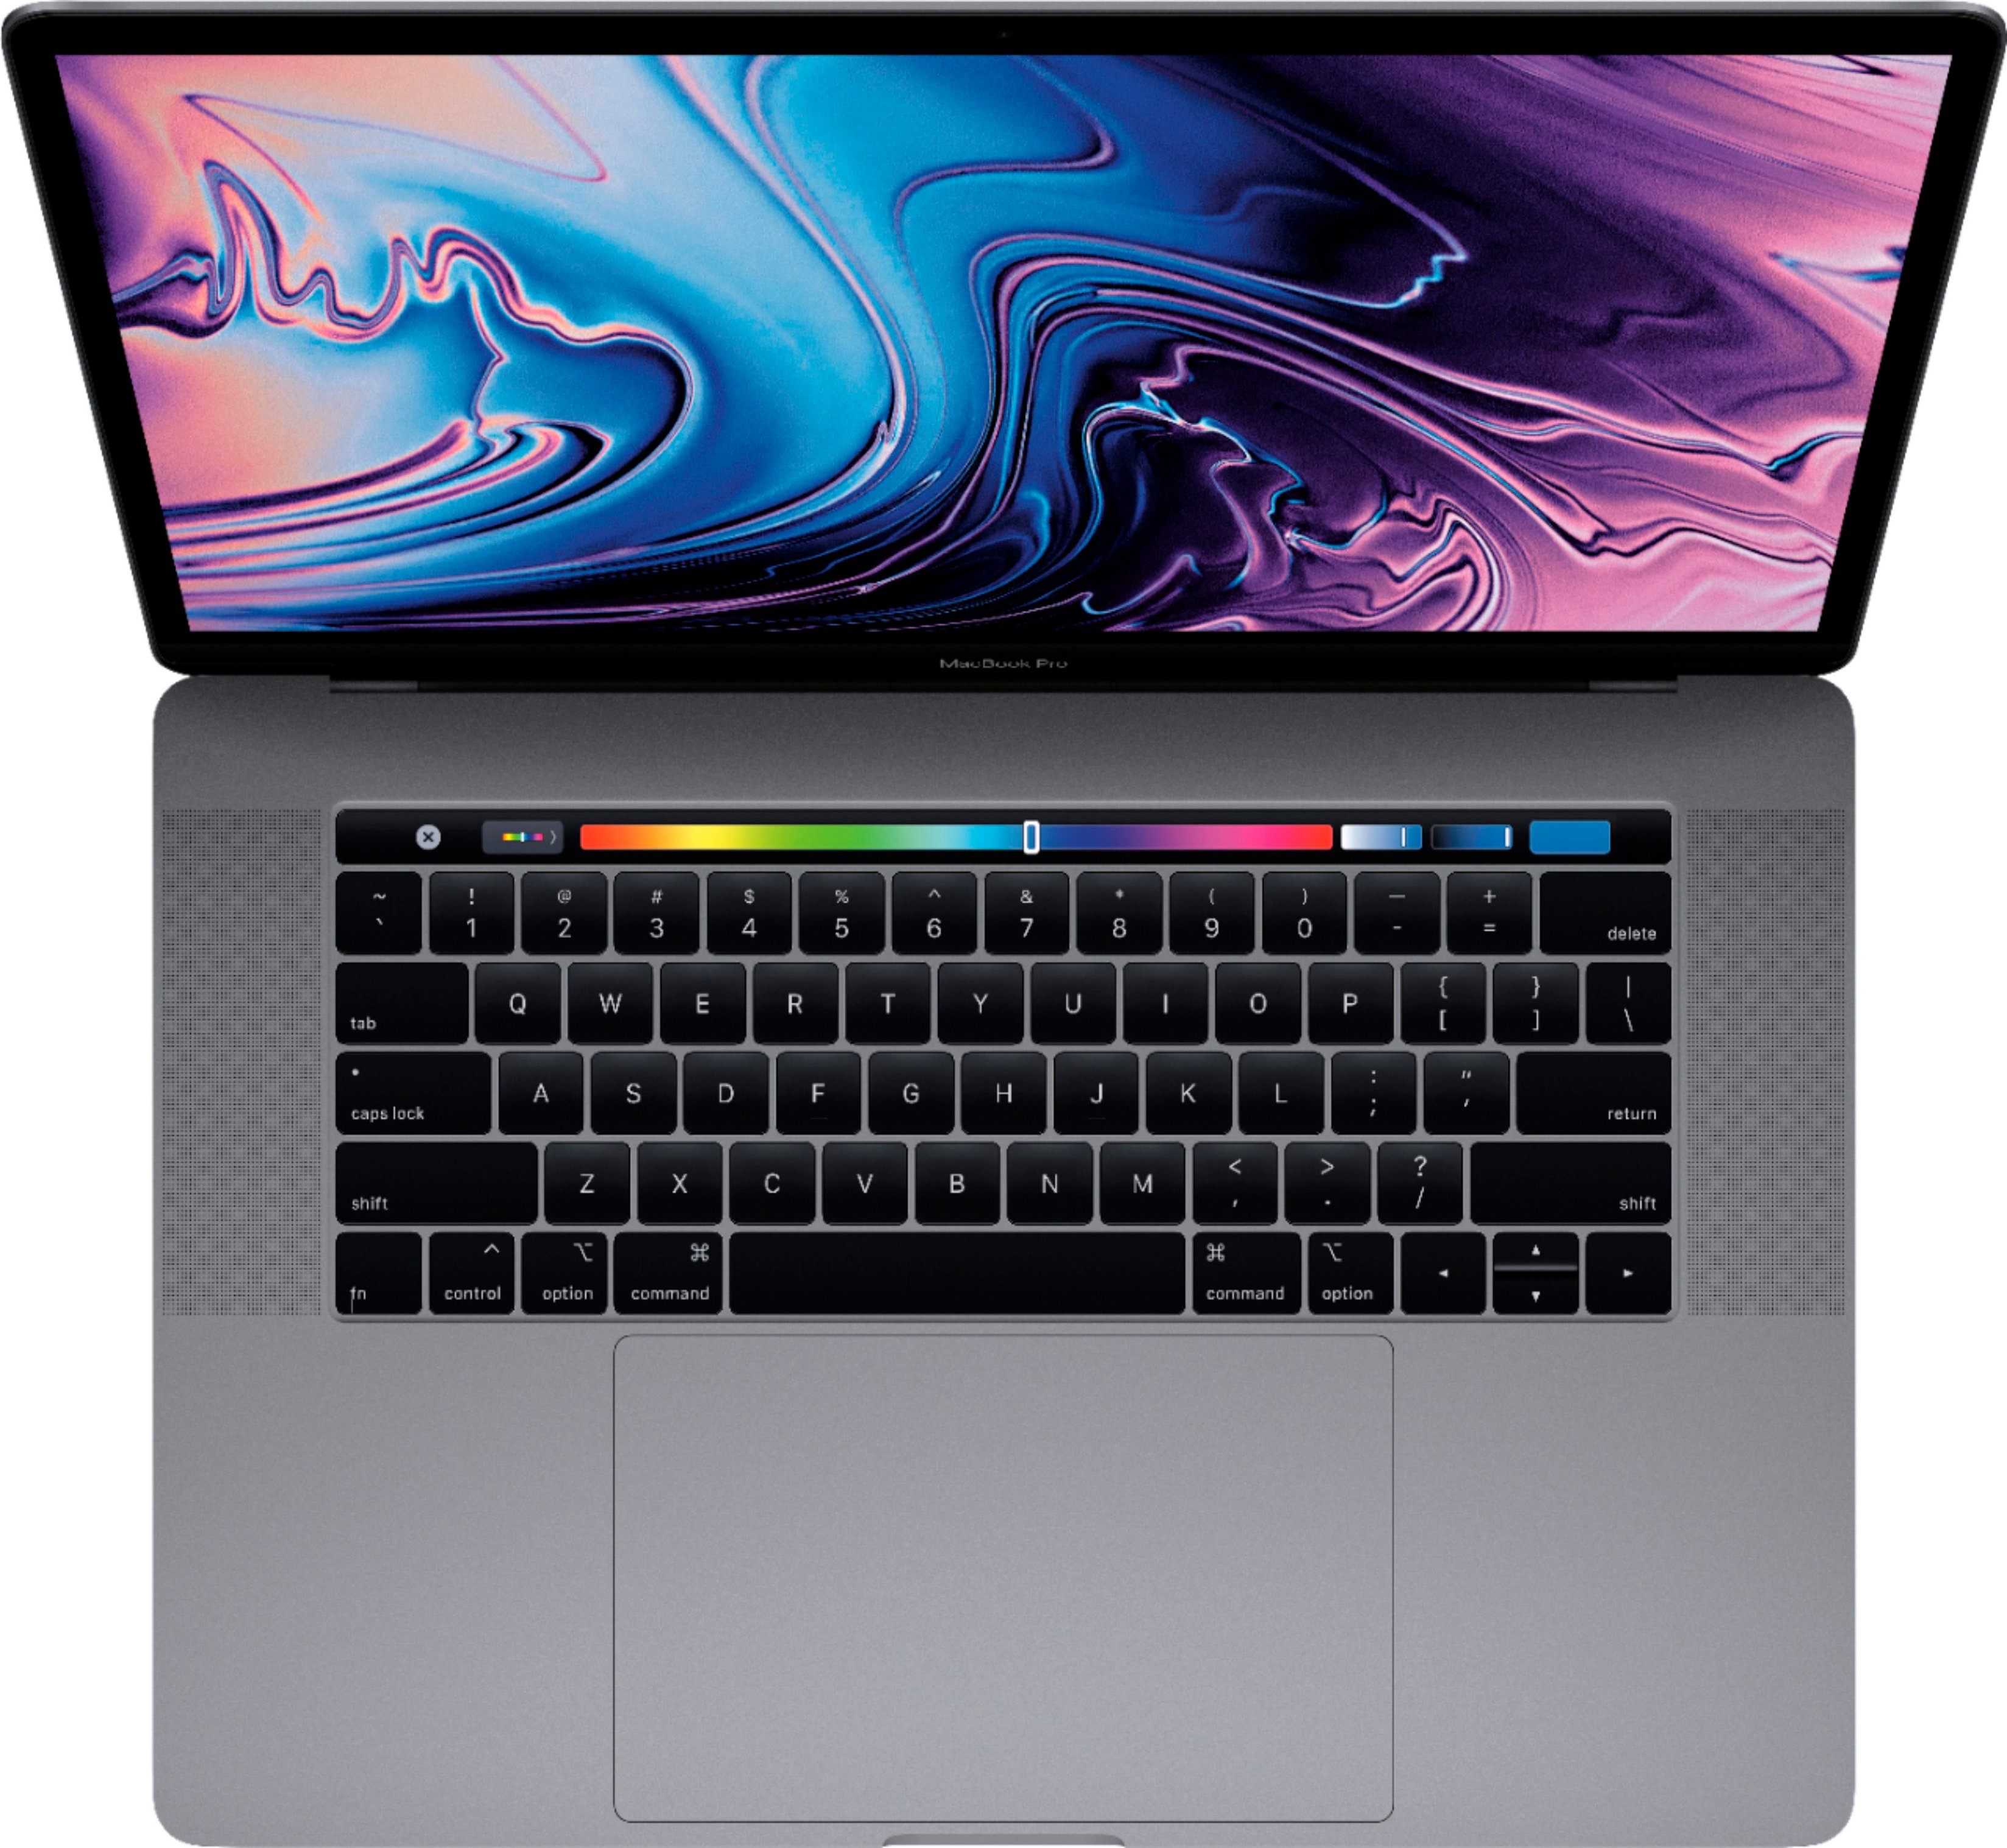 Apple MacBook Pro (15-inch, 2015) review: Old-school MacBook Pro is good  for the dongle averse - CNET